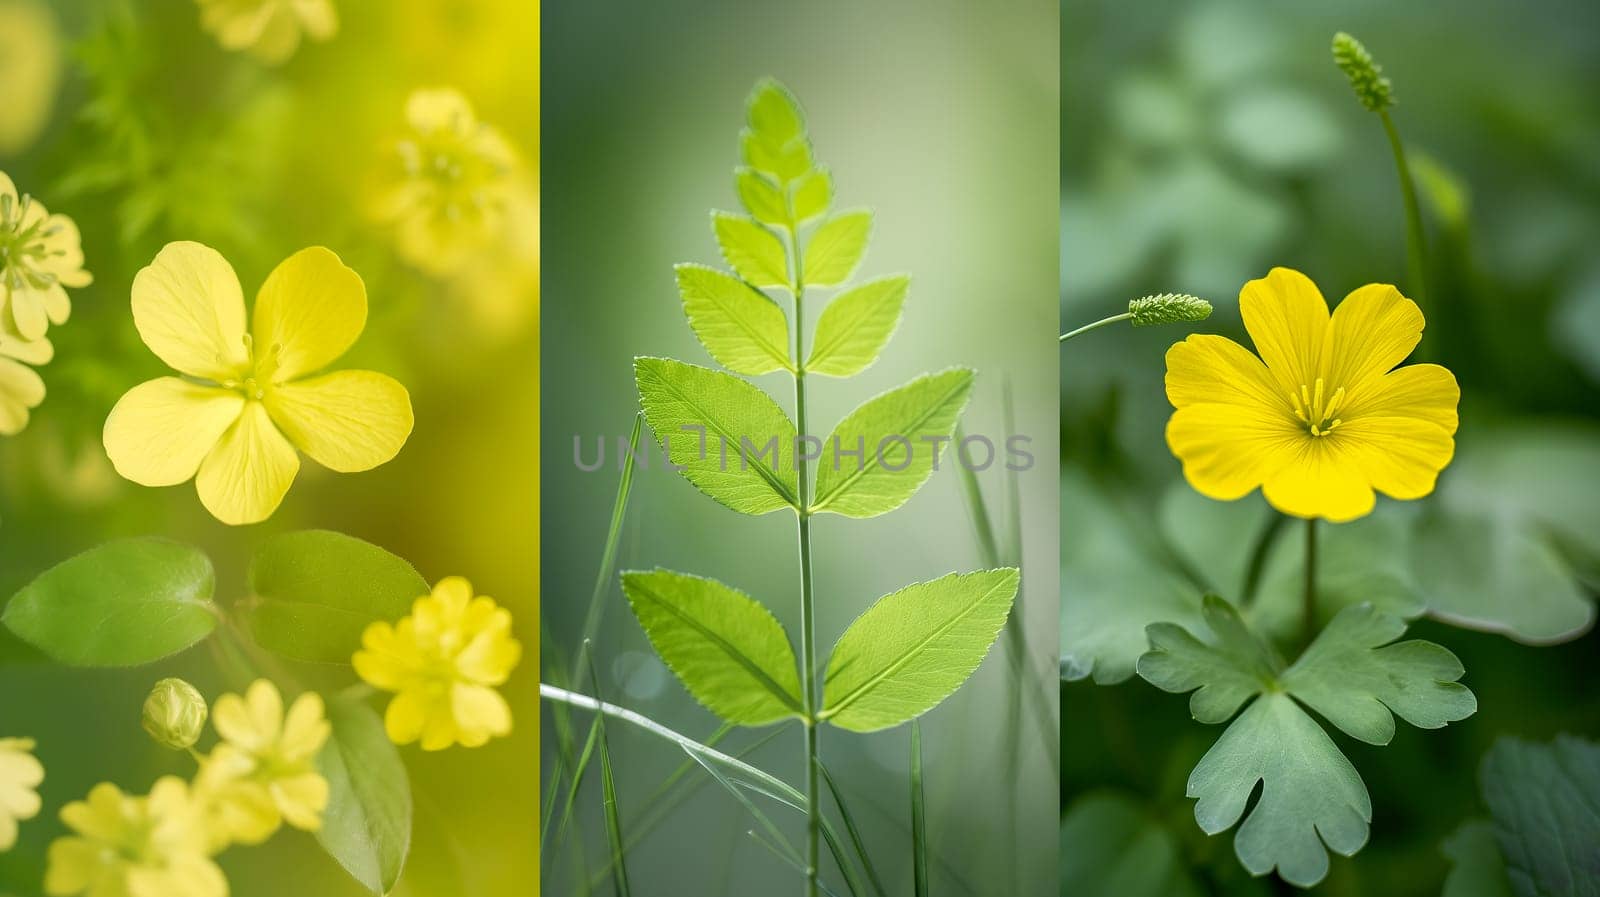 Three Different Images of Yellow Flowers and Green Leaves by chrisroll